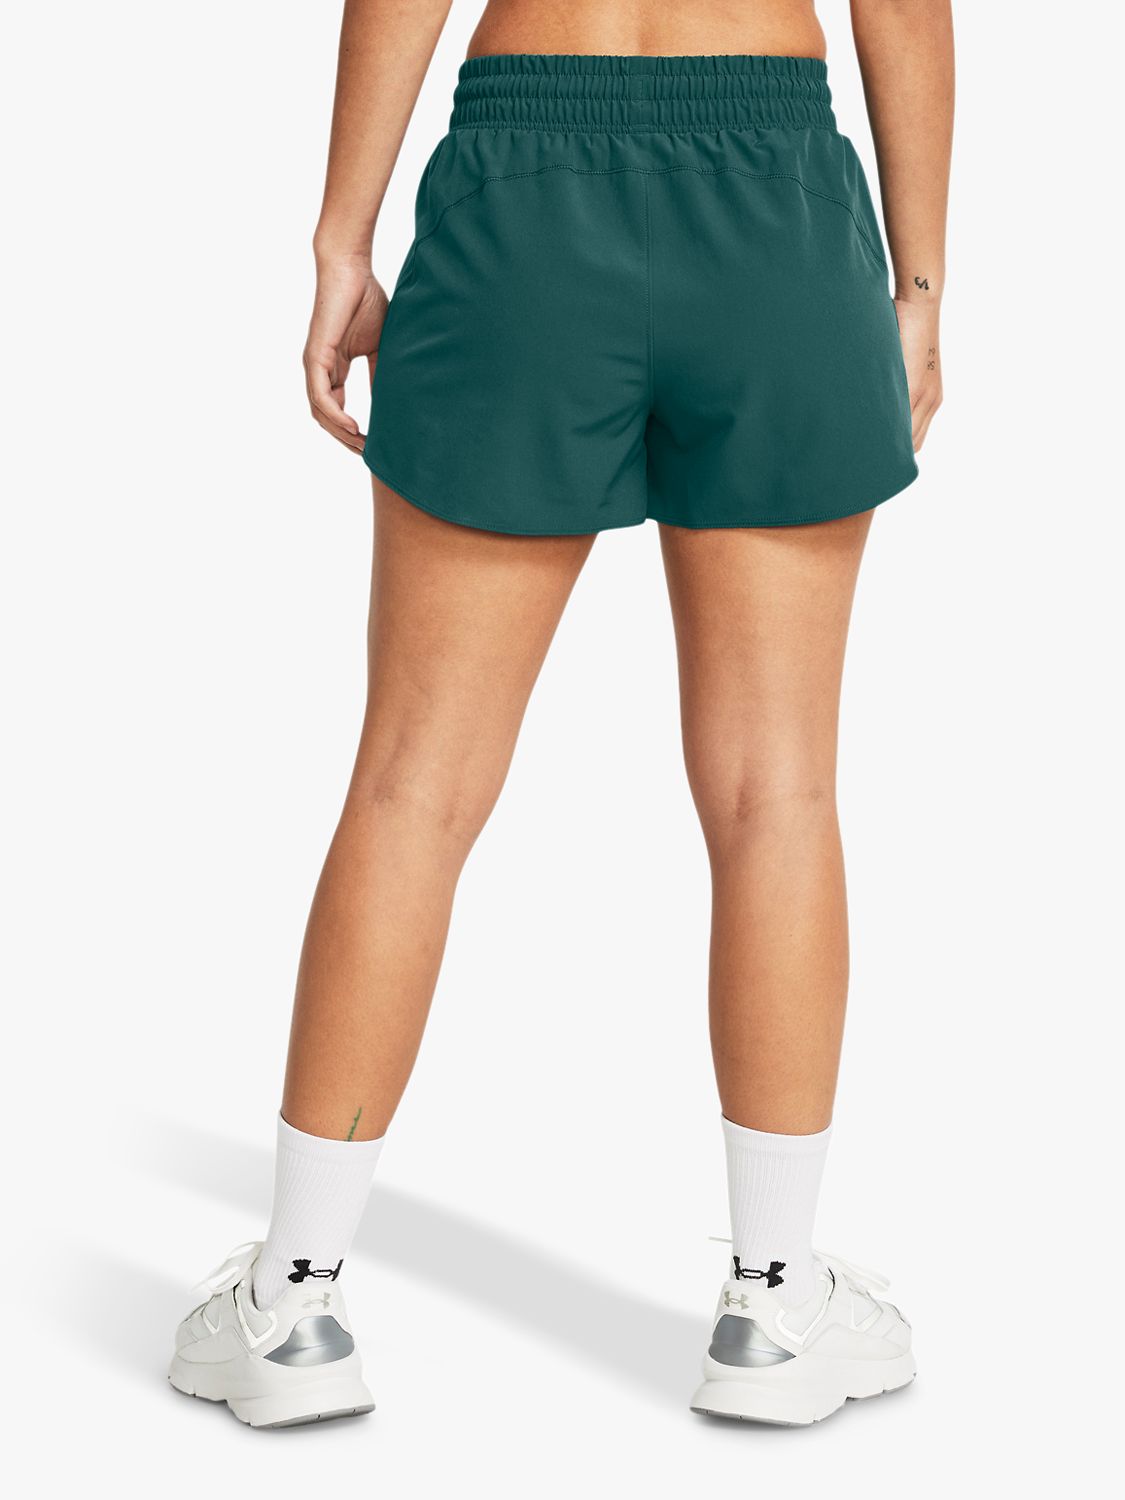 Under Armour Flex Woven 3" Running Shorts, Hydro Teal, S